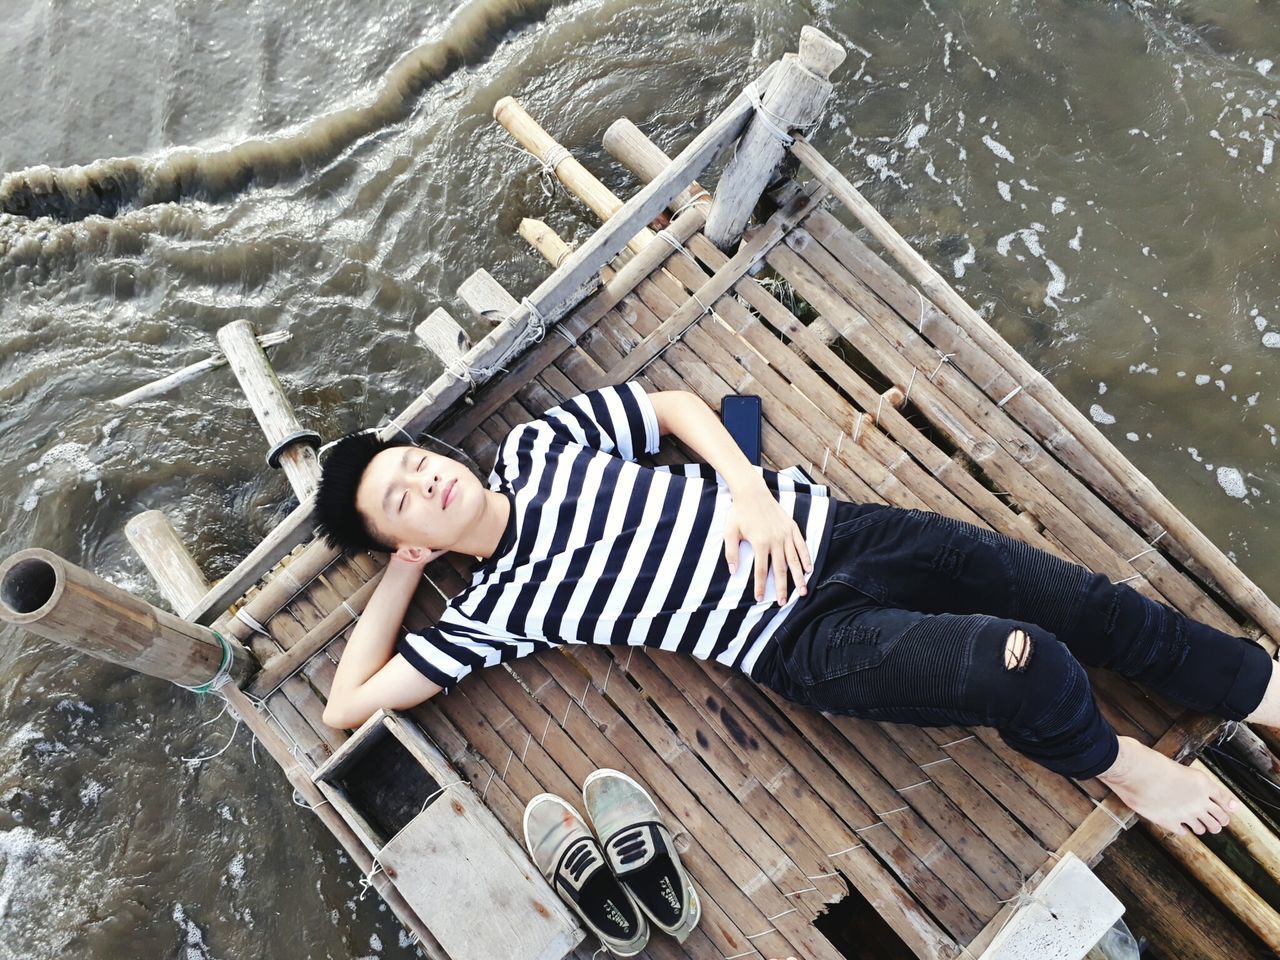 high angle view, lying on back, water, real people, lying down, leisure activity, one person, day, nautical vessel, looking at camera, full length, outdoors, relaxation, wood - material, casual clothing, young adult, young women, lake, transportation, directly above, portrait, lifestyles, wooden raft, raft, vacations, hands behind head, boat deck, beautiful woman, people